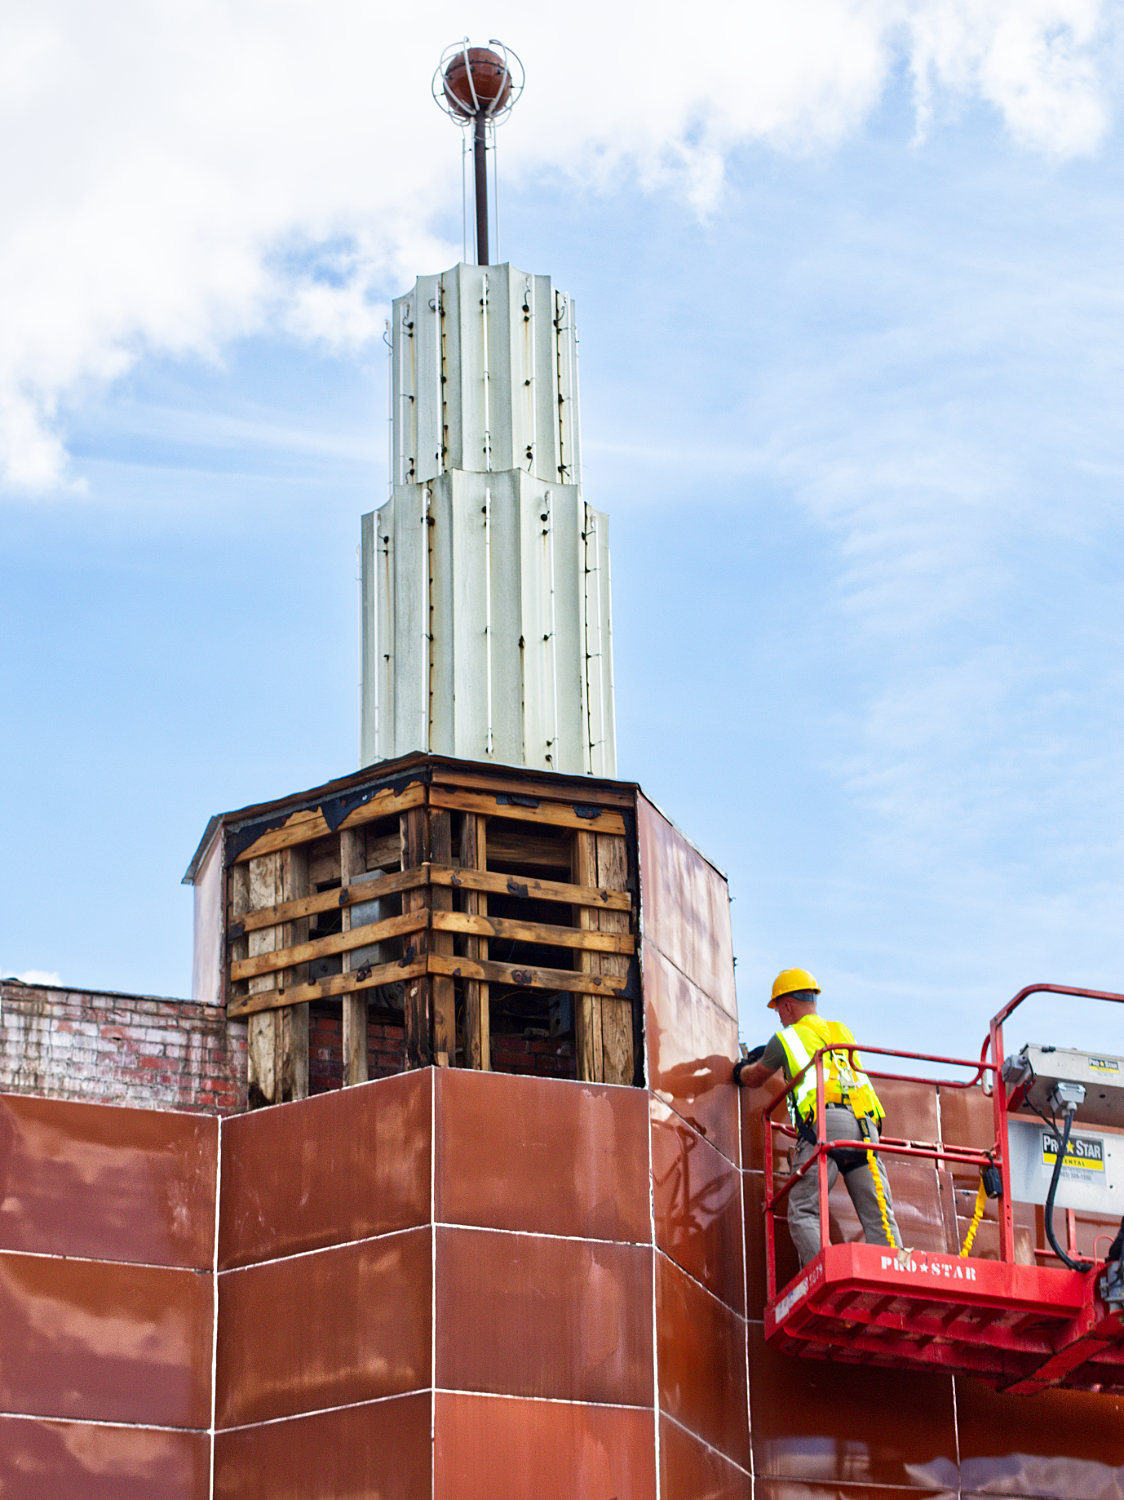 Repairs to the iconic neon tower at the historic Select theater in downtown Mineola got underway last week. The lumber in the substructure is being replaced to stabilize the tower, which was in danger of collapsing.